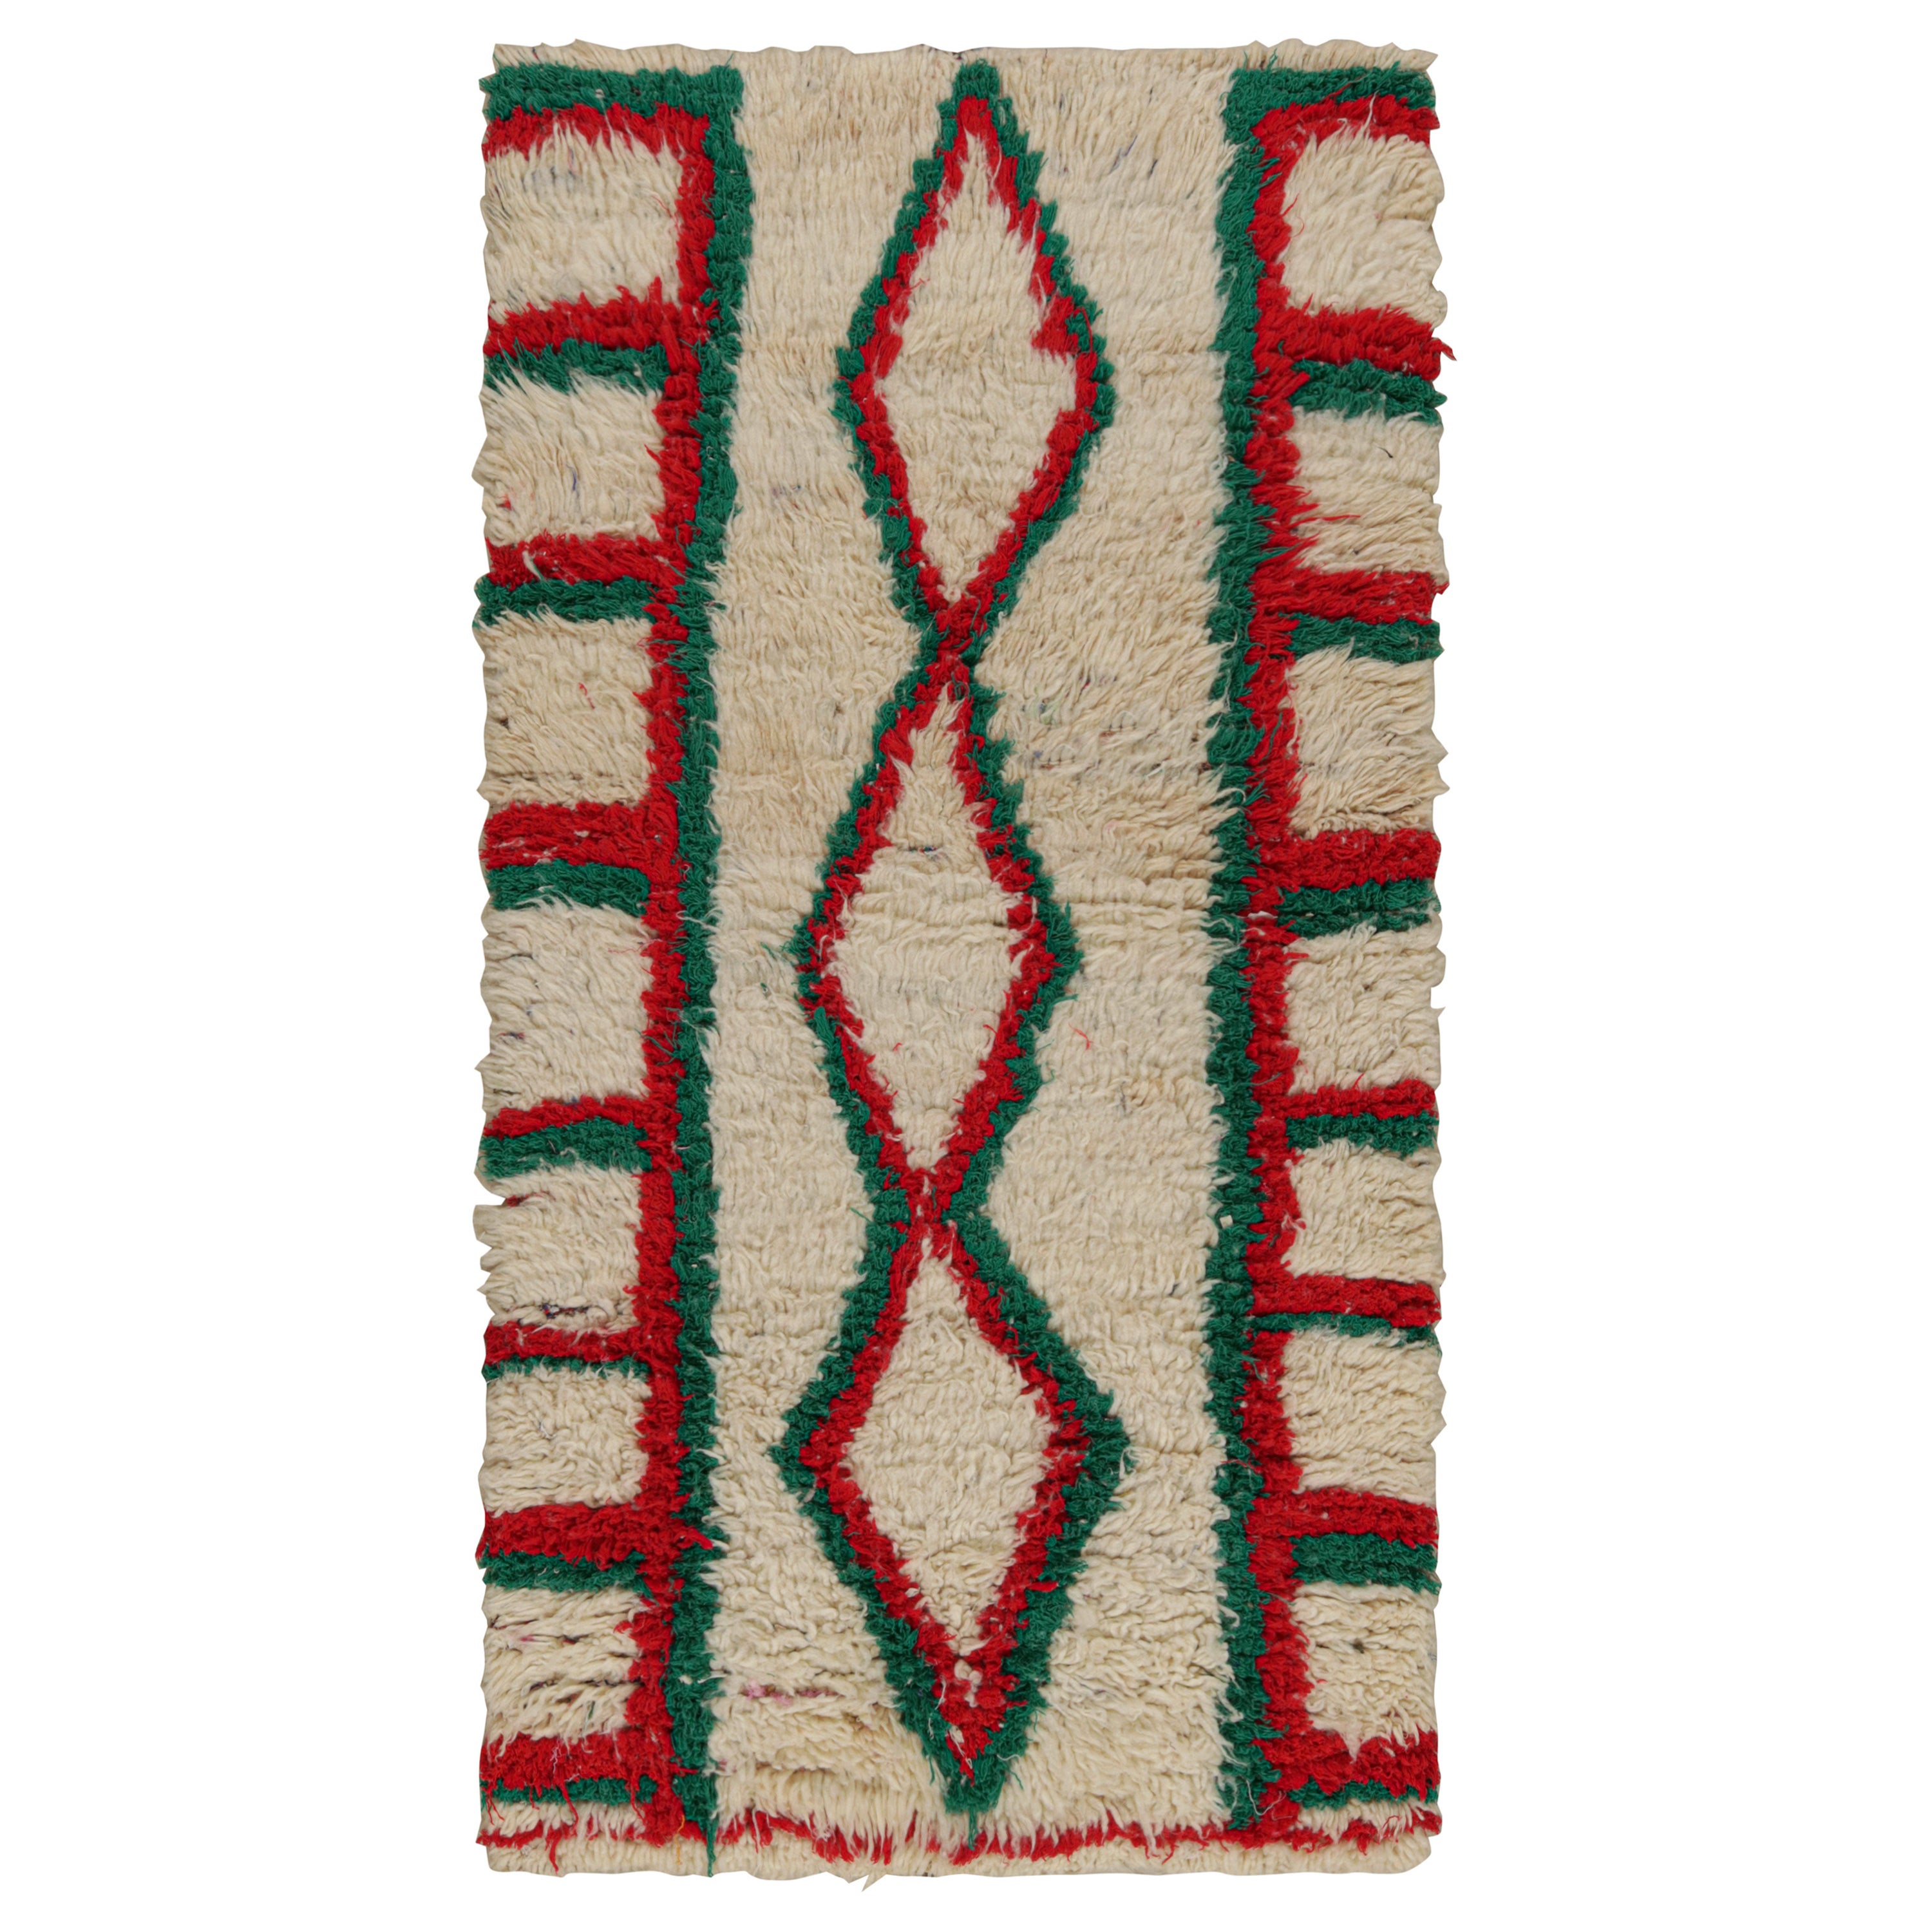 Vintage Moroccan Runner Rug with Red and Green Patterns, from Rug & Kilim  For Sale